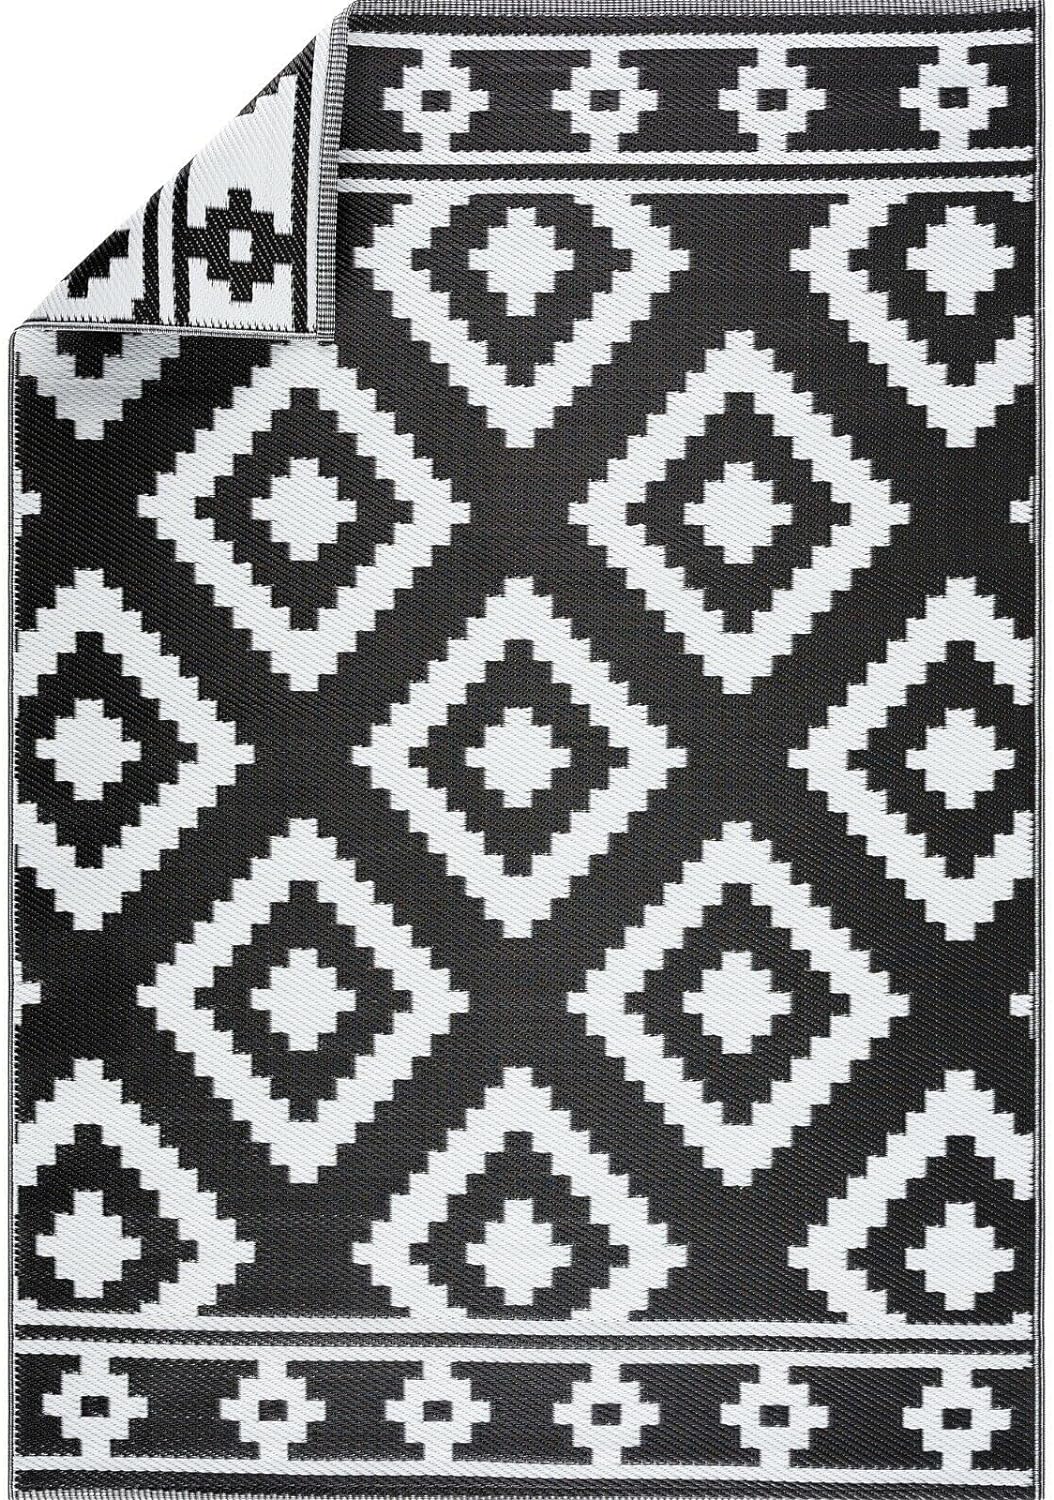 Playa Outdoor Rug - Crease-Free Recycled Plastic Floor Mat for Patio, Camping, Beach, Balcony, Porch, Deck - Weather, Water, Stain, Lightweight, Fade and UV Resistant - Milan- Black & White